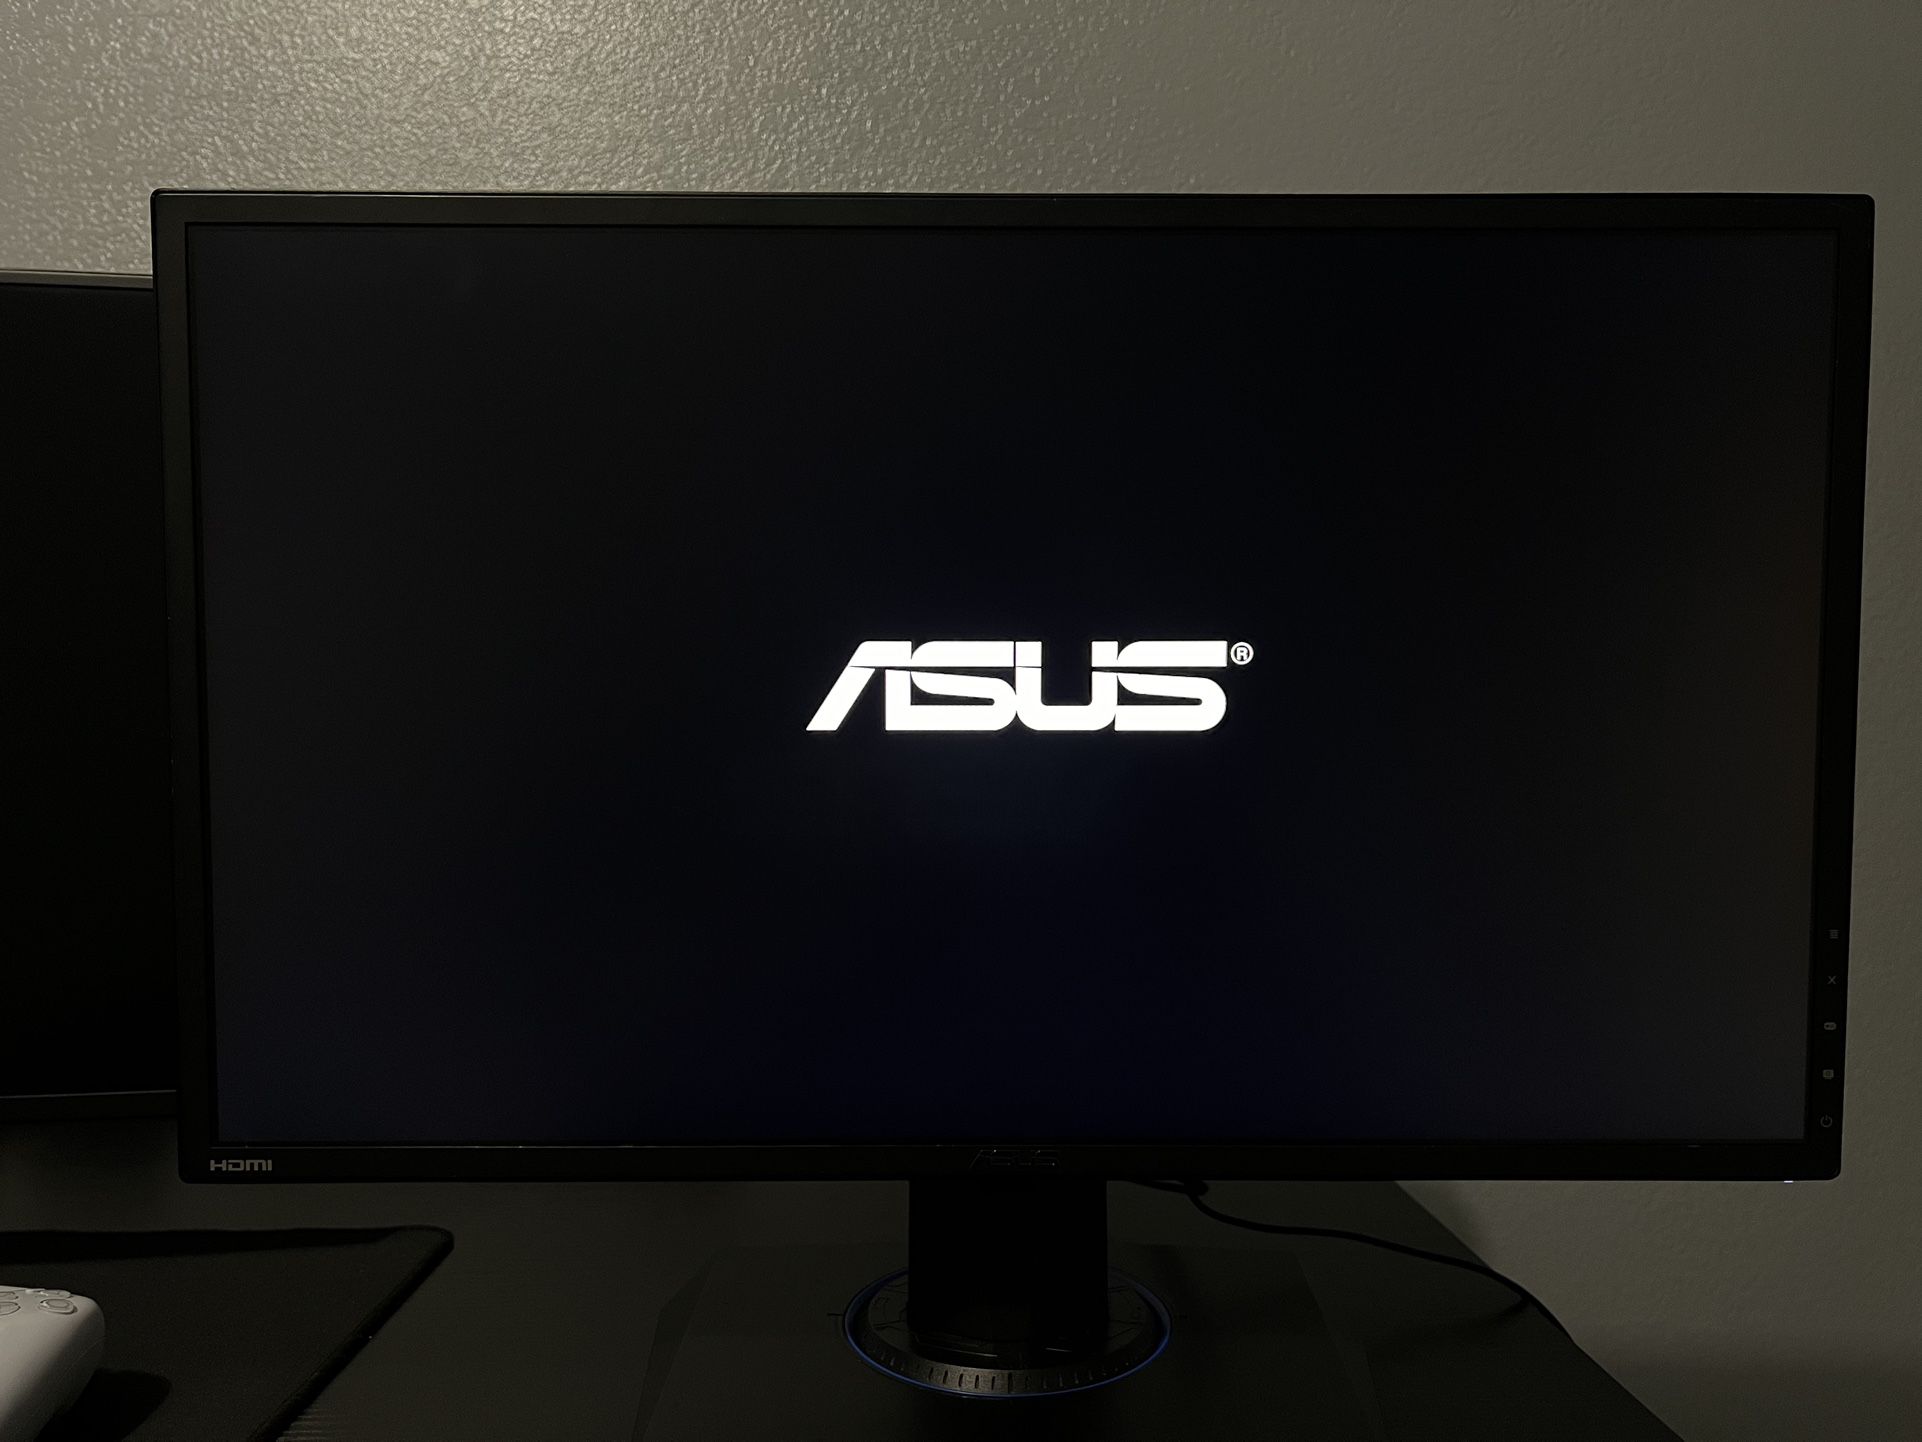 ASUS VG245H 24" HD Widescreen Gaming Monitor With Power Cord